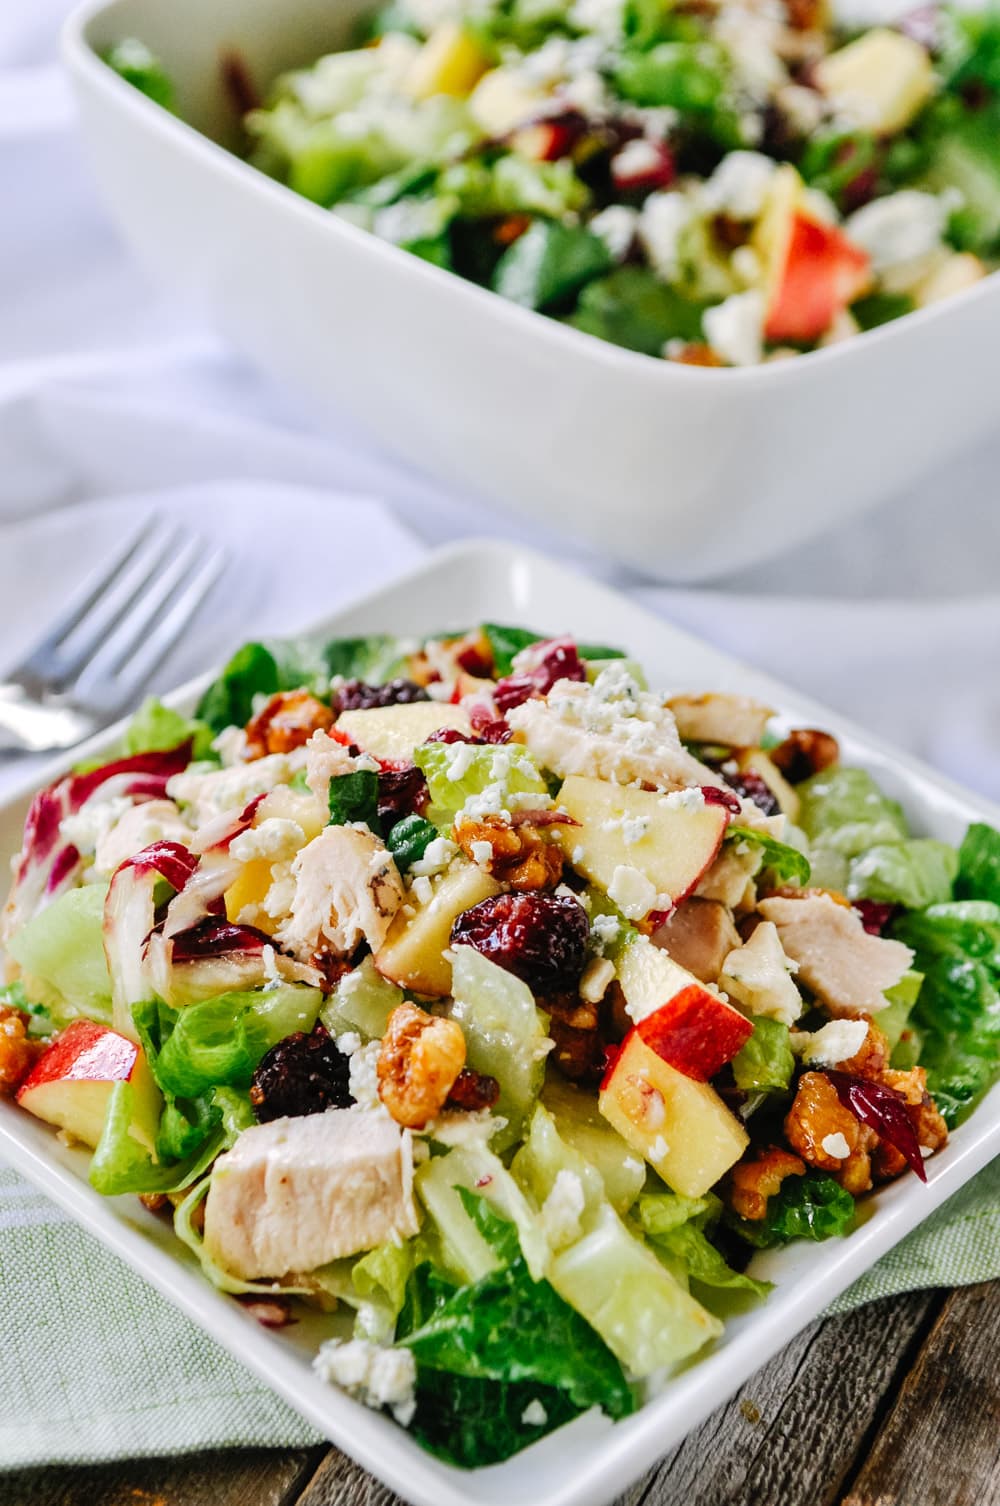 Winter Salad with apples and walnuts on a plate